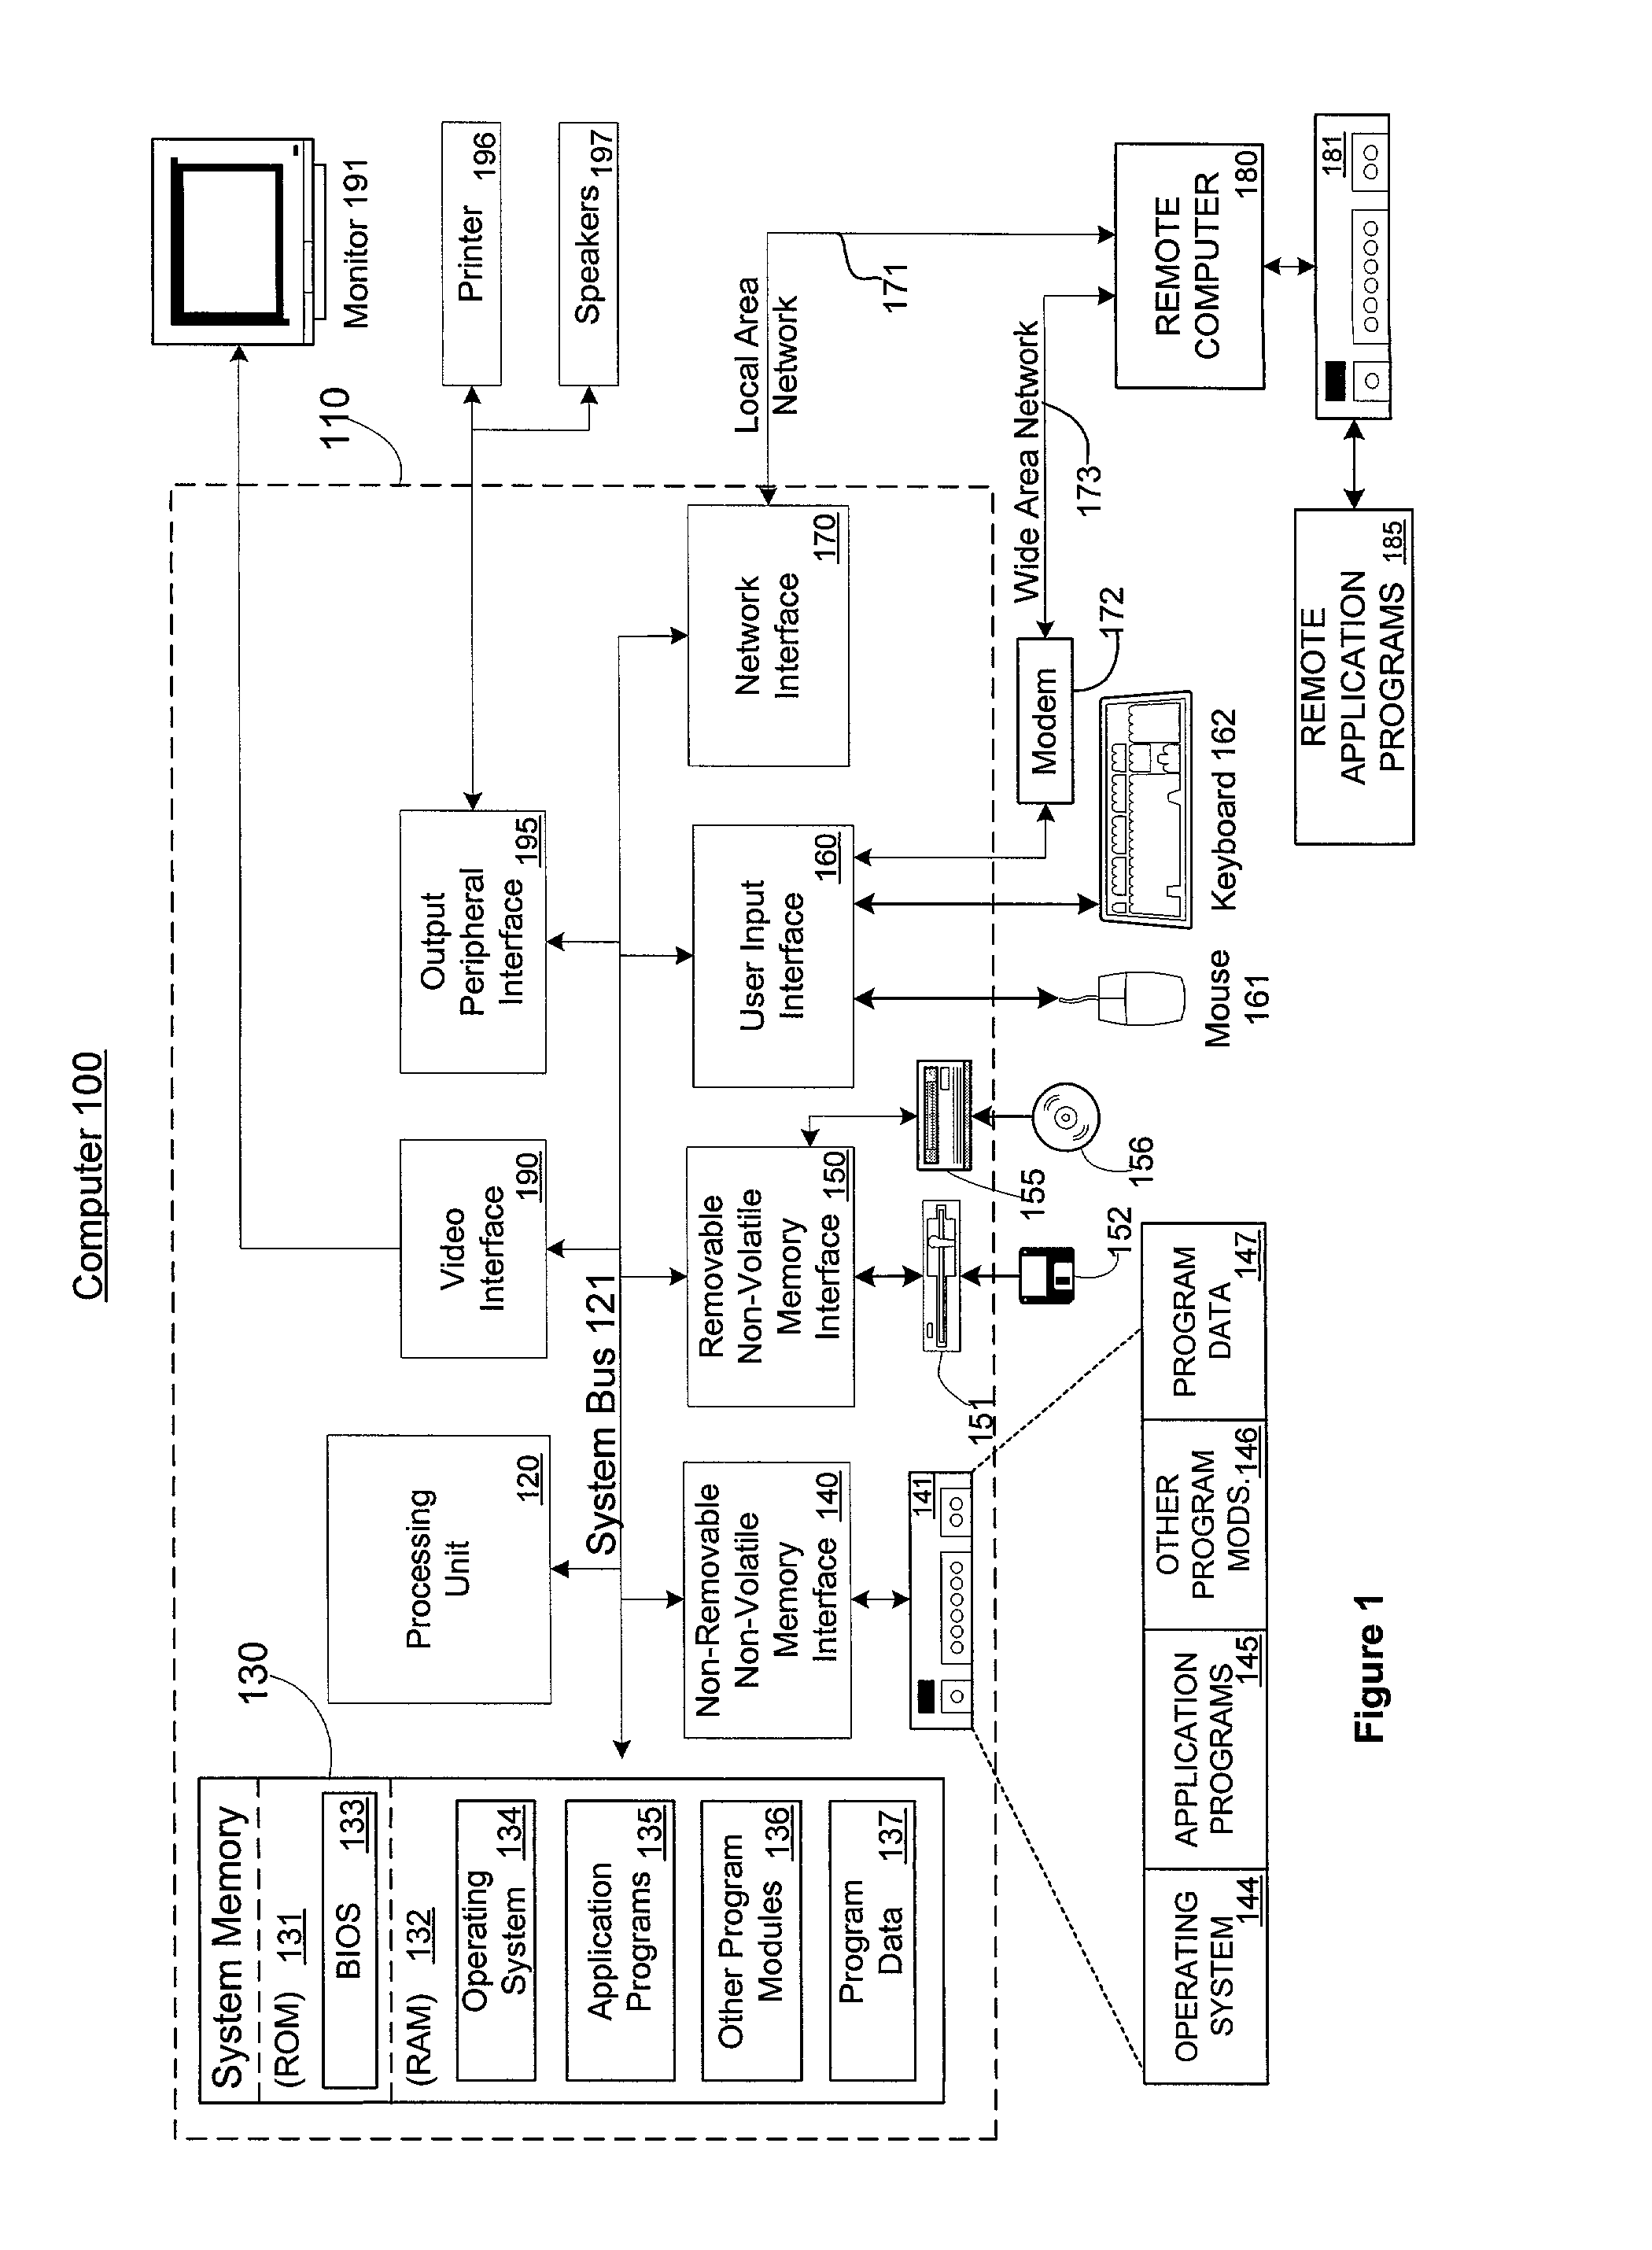 System and method for using native floating point microprocessor instructions to manipulate 16-bit floating point data representations